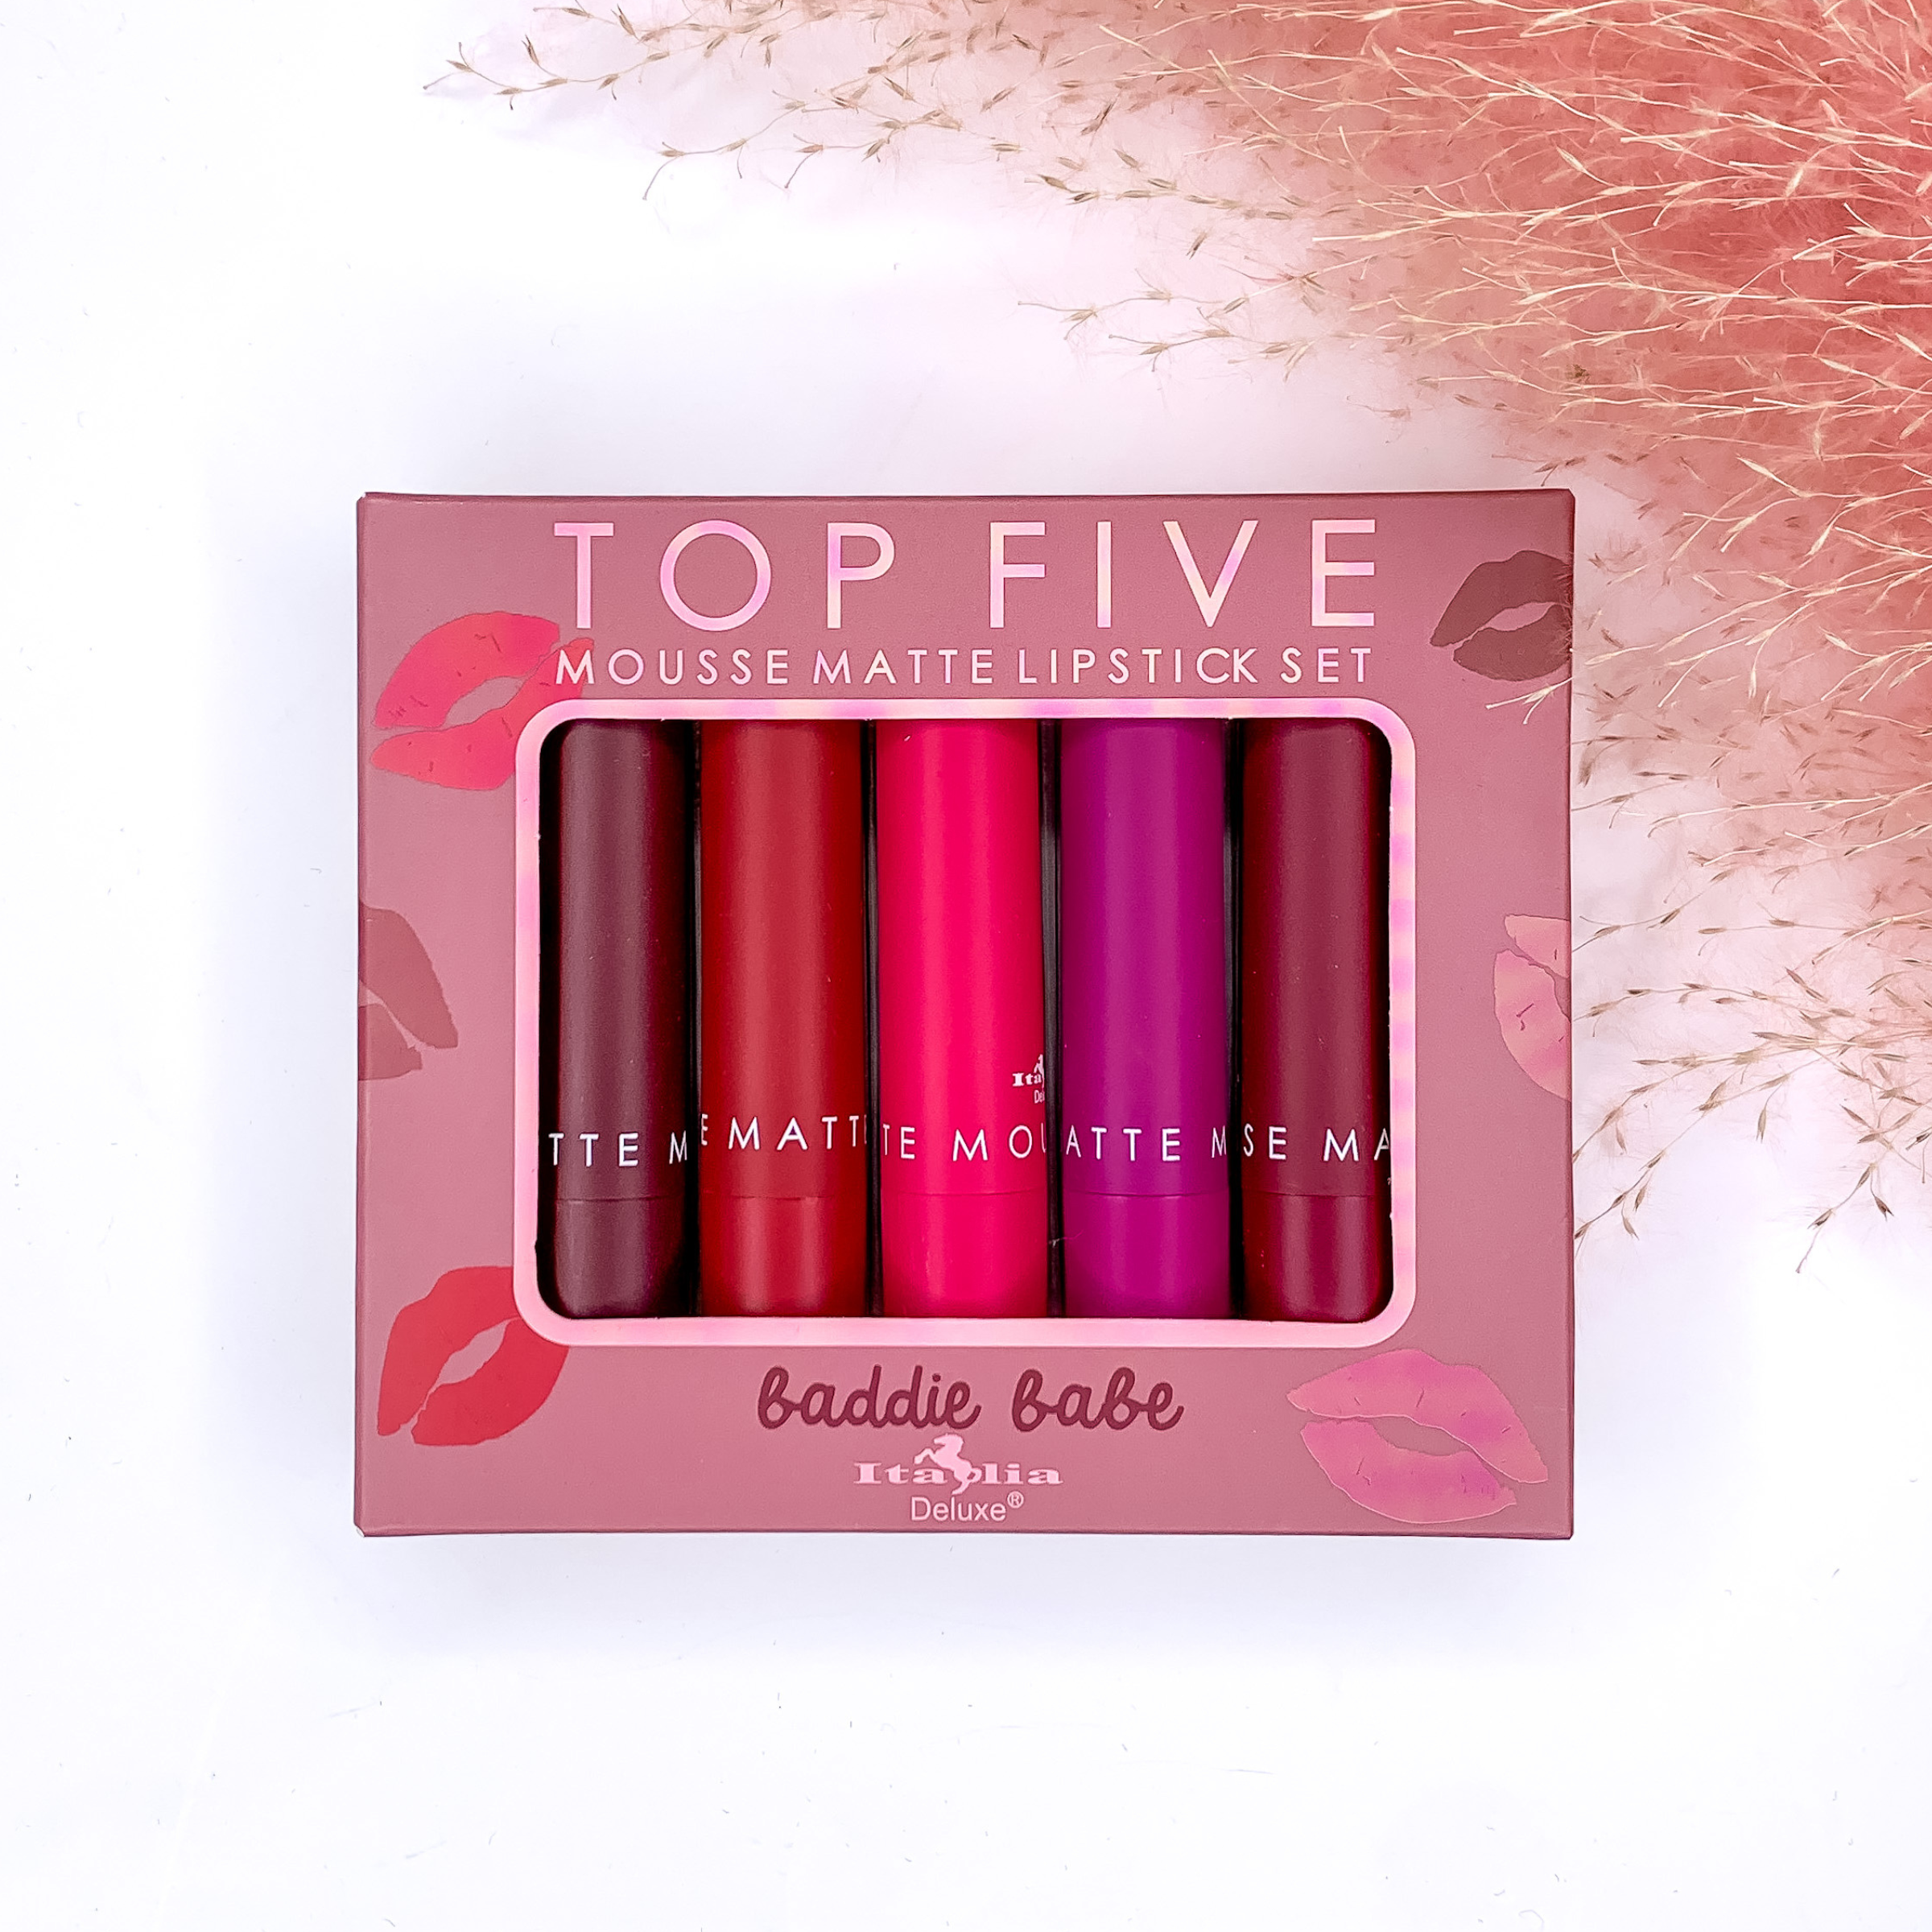 In a light purple box, there are 5 lip stick tubes. Colors included are dark purple, red, pink, purple, and dark red. This set is pictured on a white background with pink pompus grass in the top right corner. 